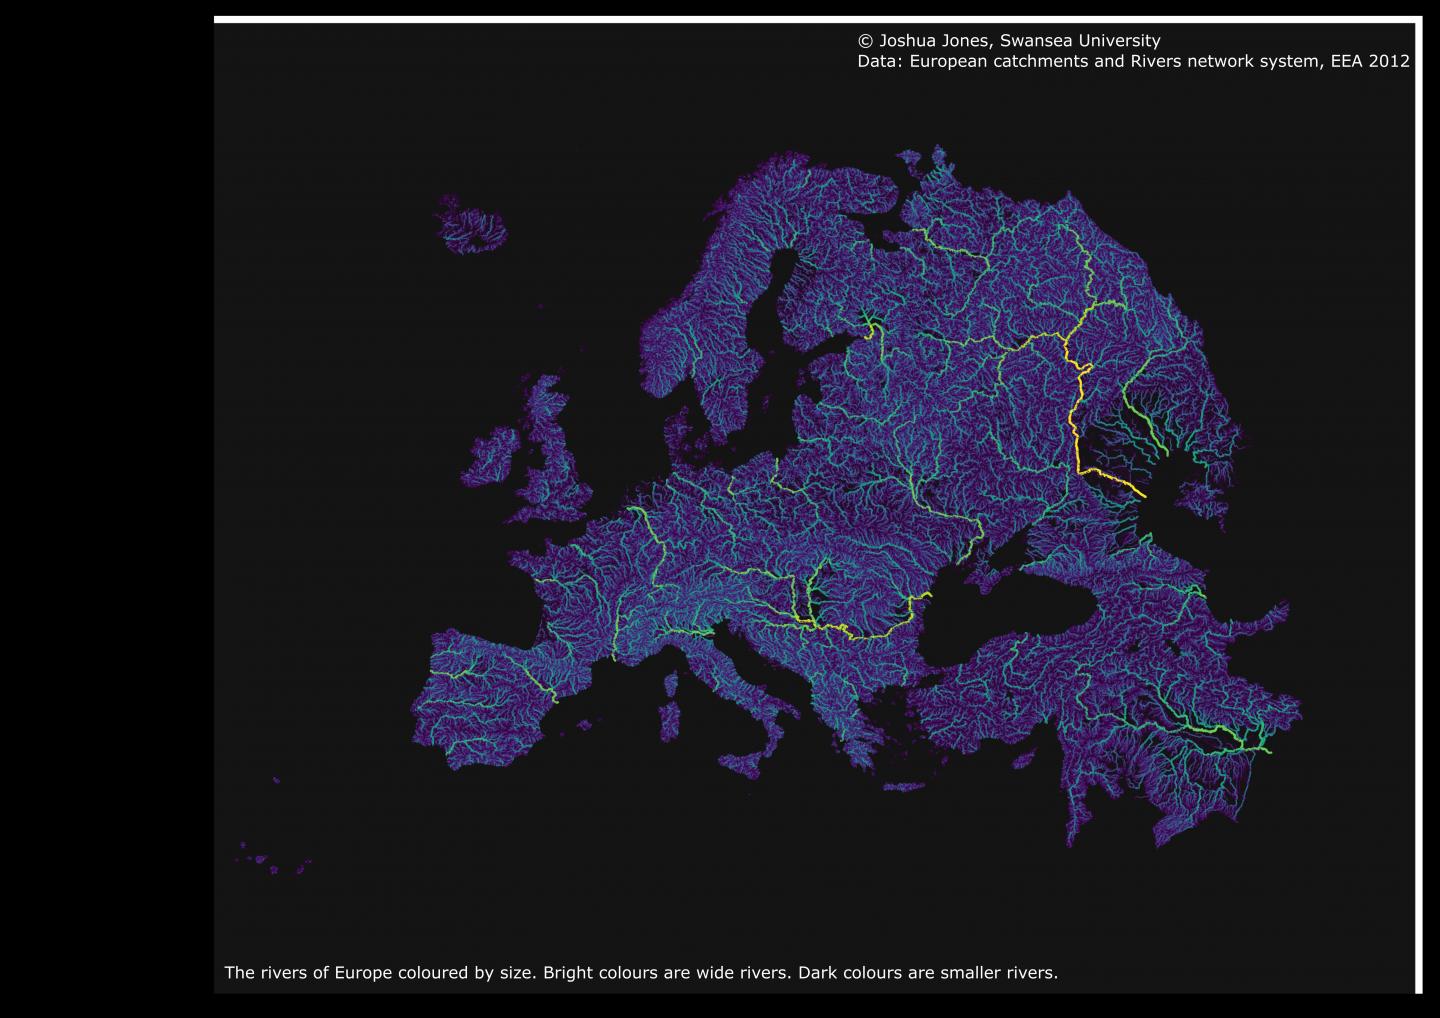 European Catchments and Rivers Network System